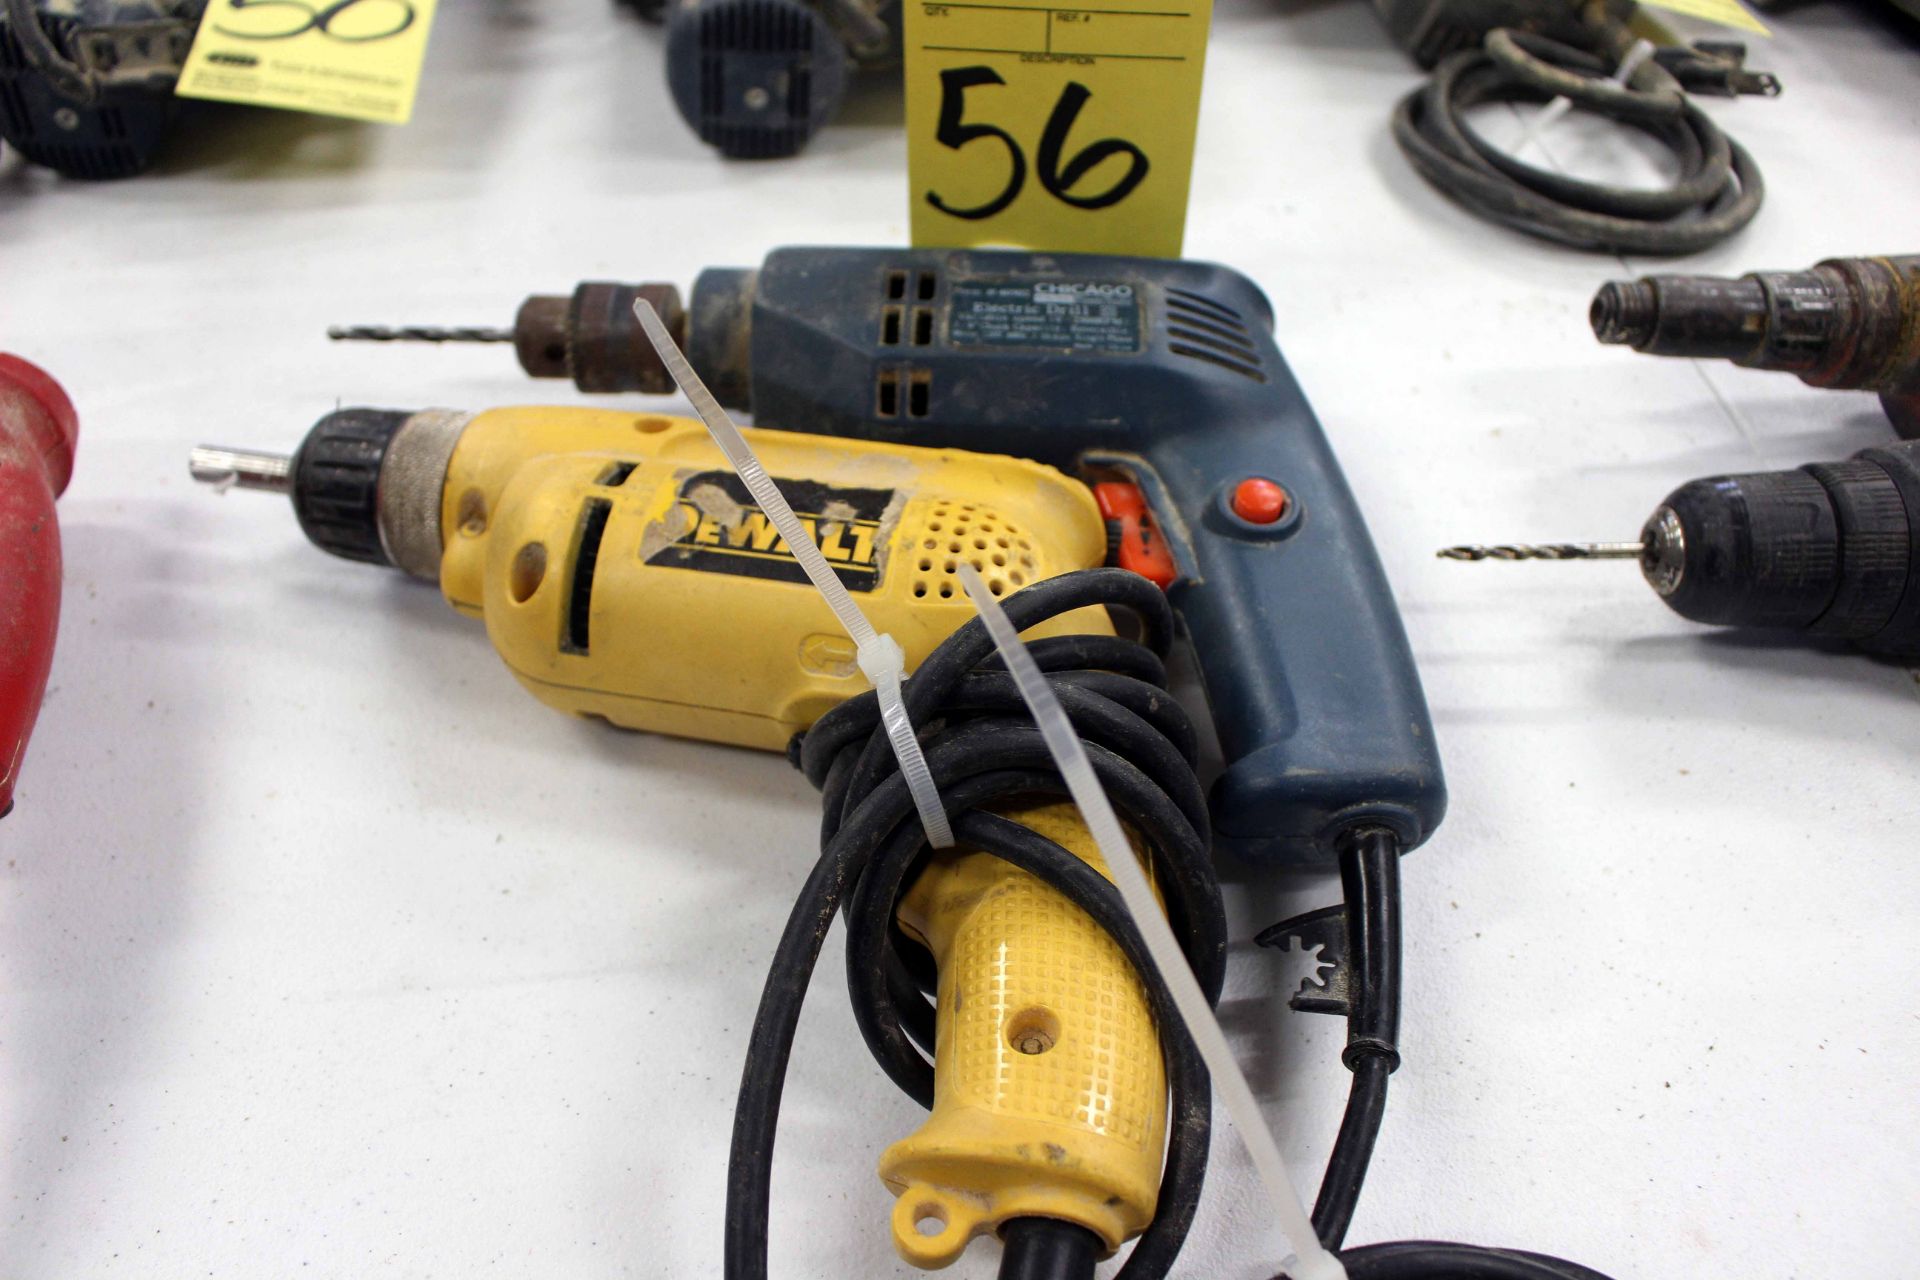 LOT OF ELECTRIC DRILLS (2)